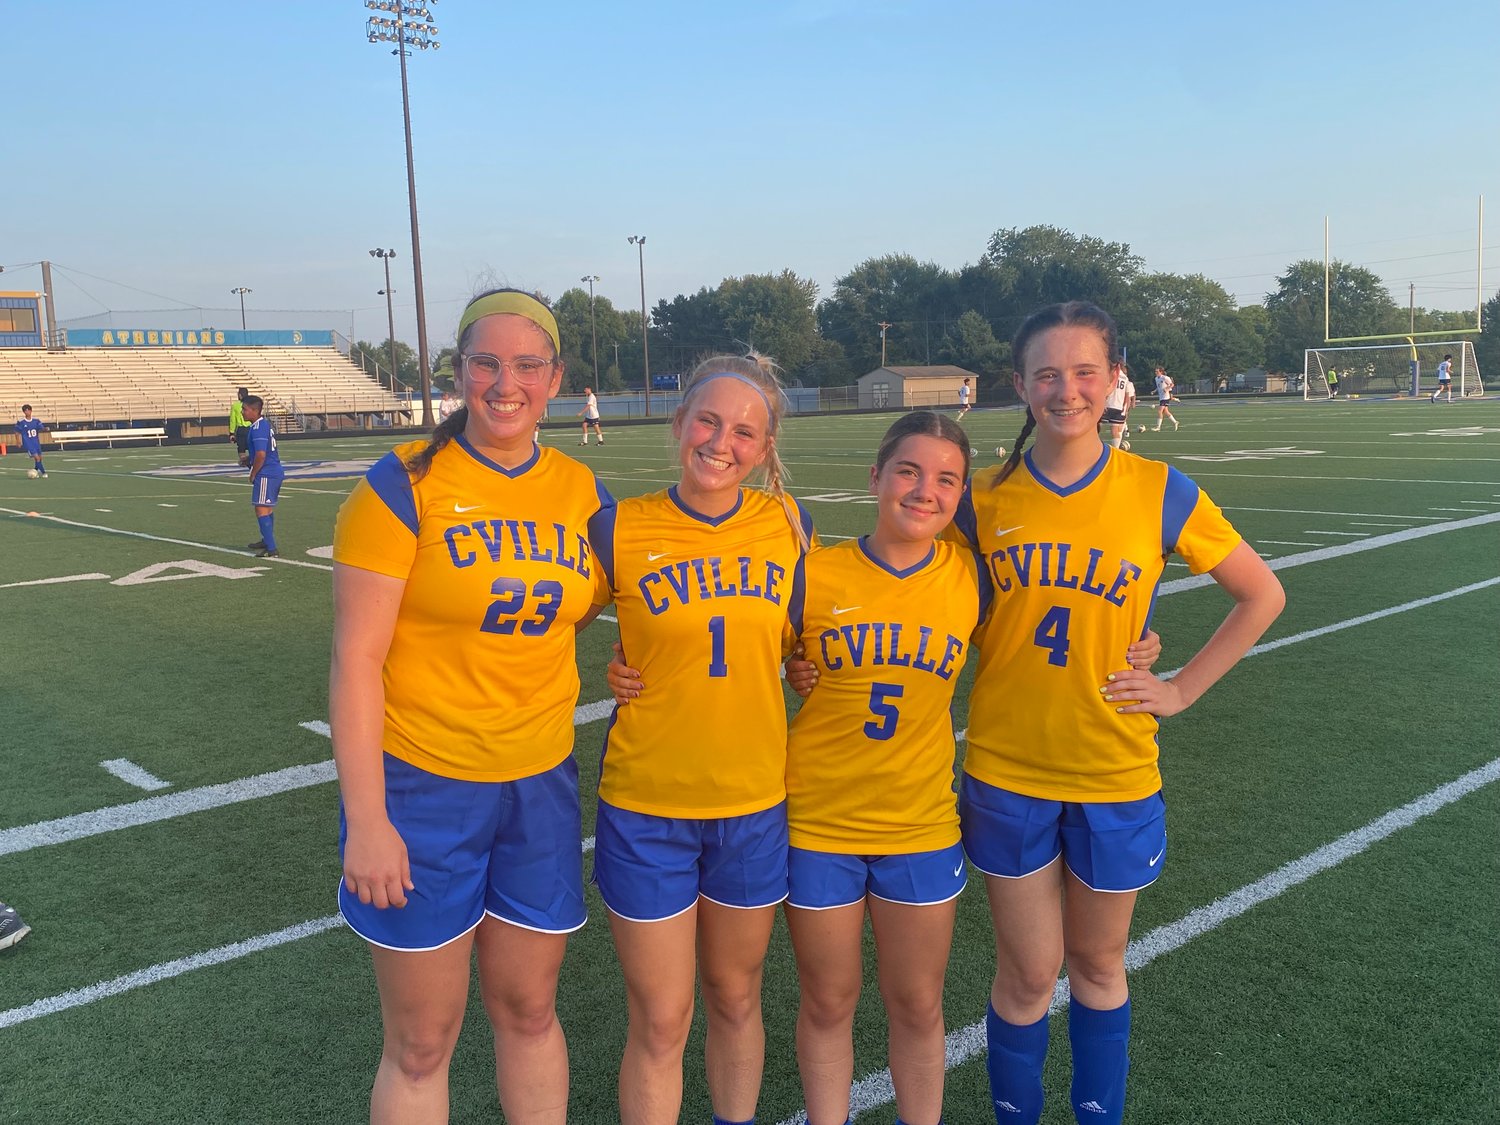 Pictured L-R are the four Crawfordsville Girls Soccer seniors in Cassi Bacon, Jayda Roach, Paige Corbin, and Lorelei Schmitzer-Torbert. The four seniors helped the Athenians notch a 3-0 win over North Putnam on their senior night.